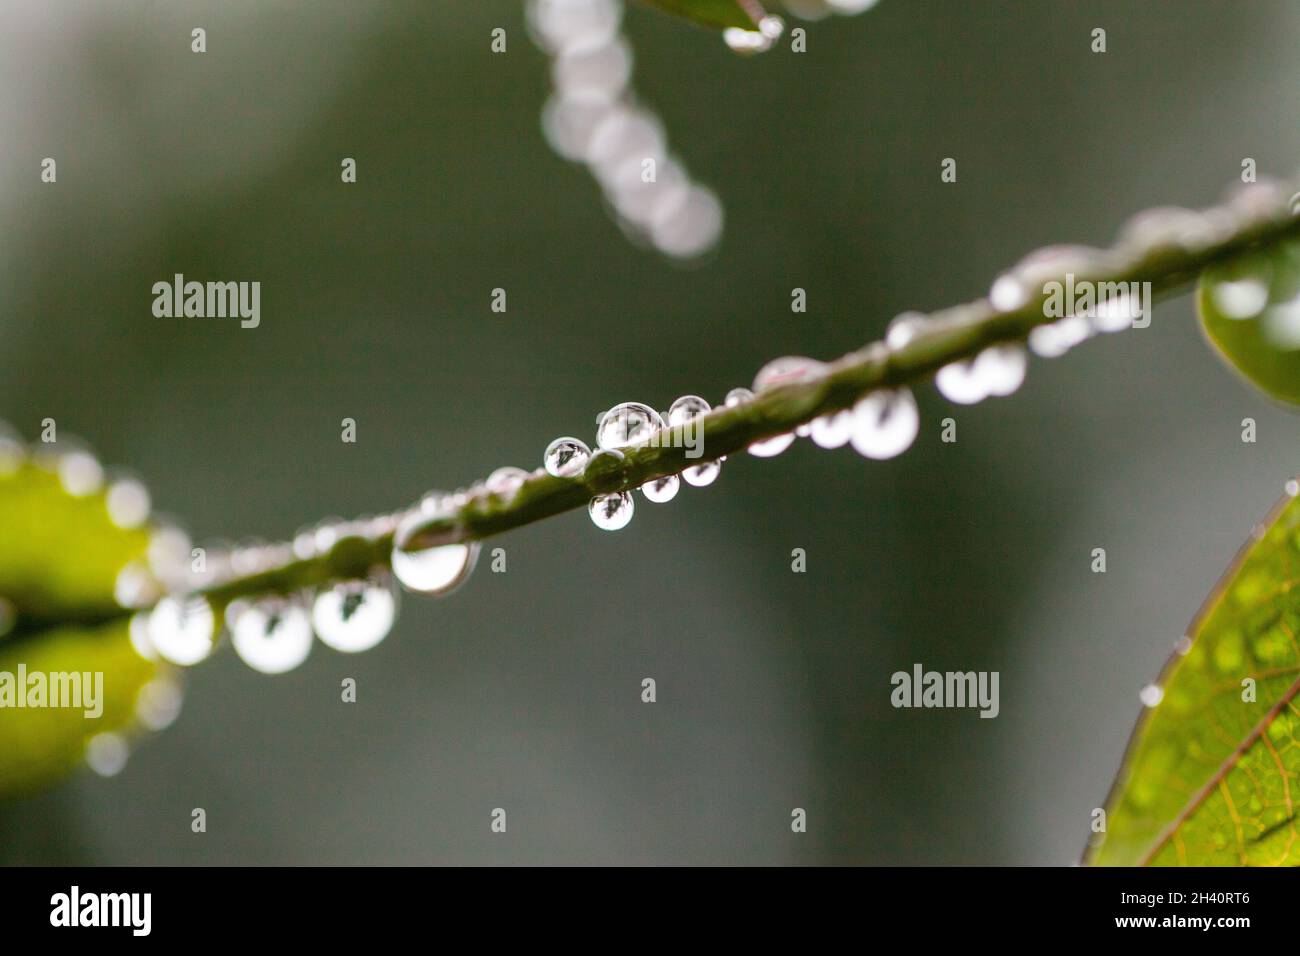 A background, soft focus image of raindrops hanging on thin branches or twigs during the winter months. Stock Photo